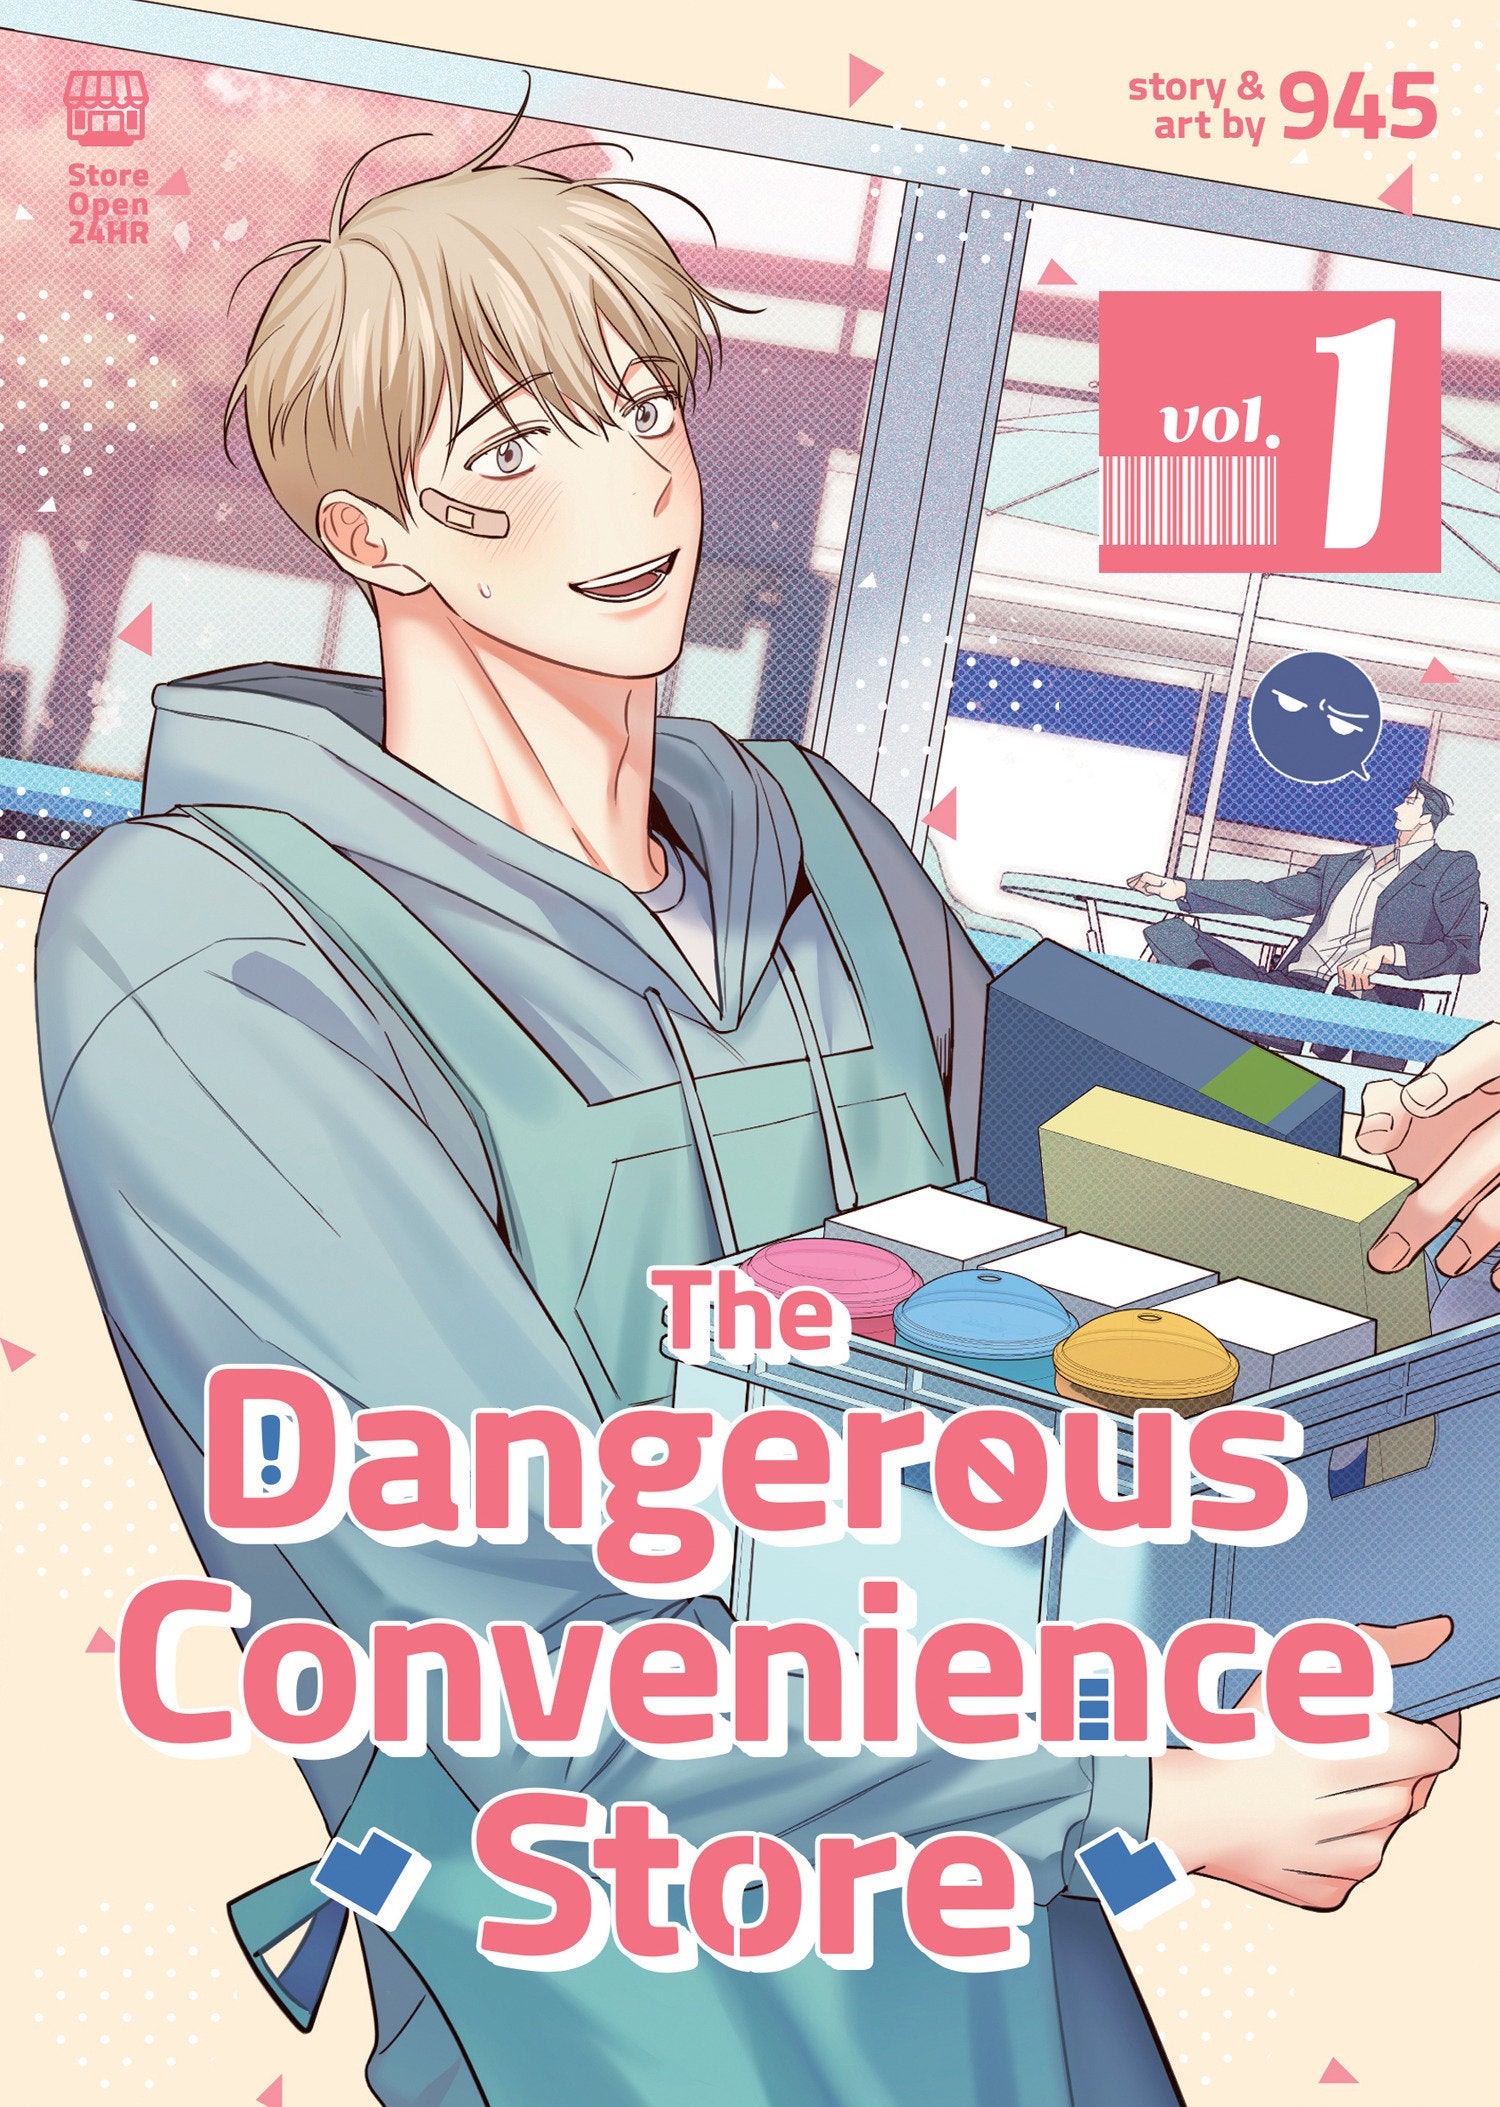 The Dangerous Convenience Store Volume. 1 | L.A. Mood Comics and Games